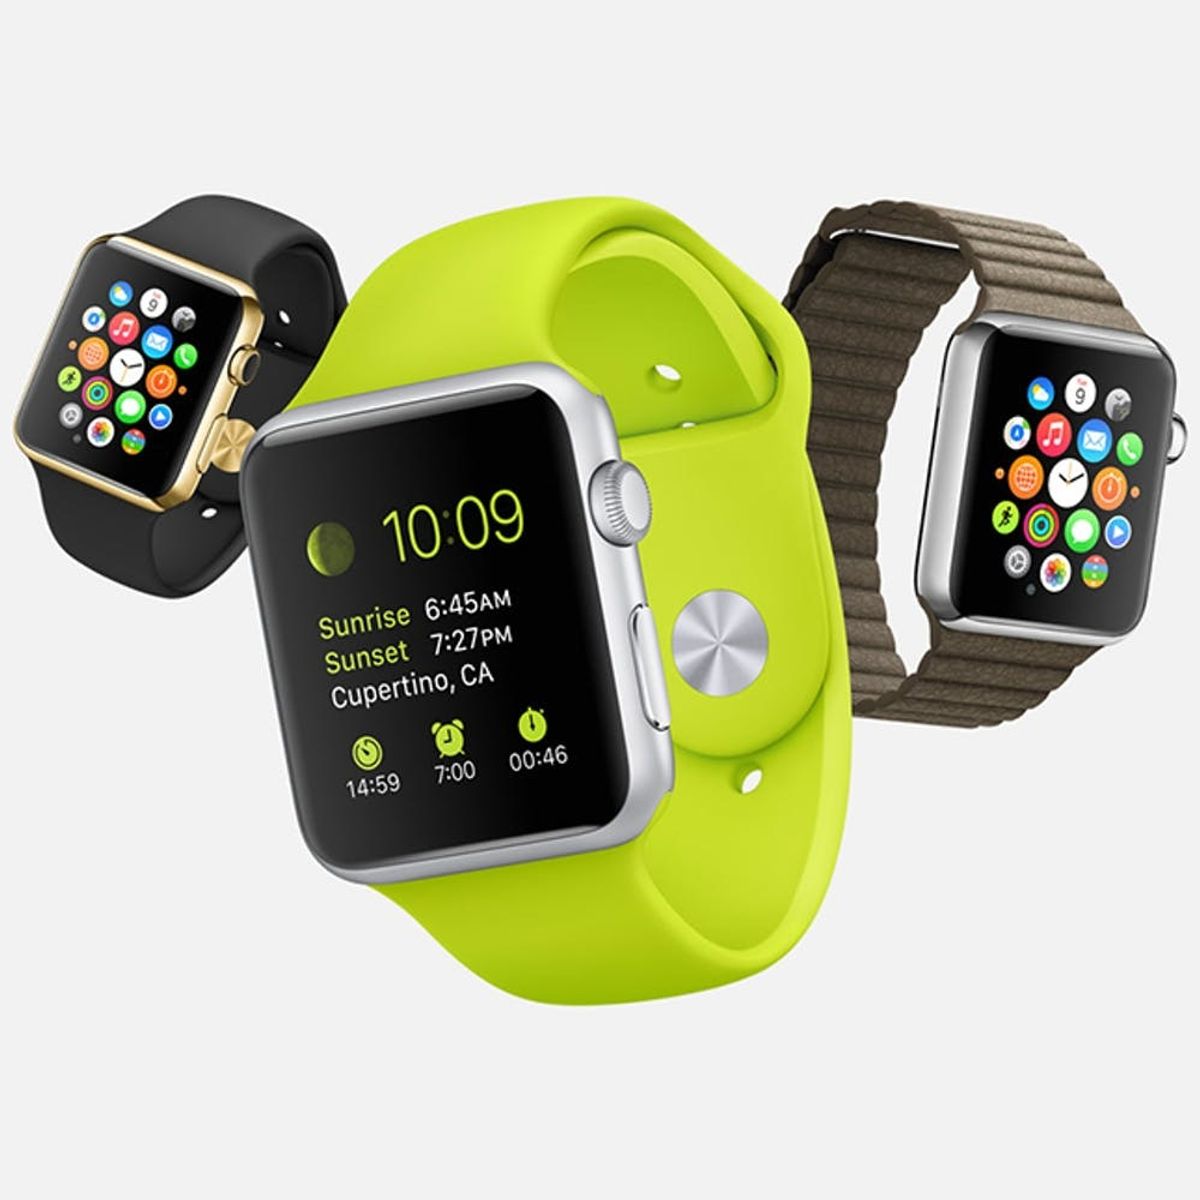 5 Questions That Will Be Answered at Monday’s Apple Watch Event